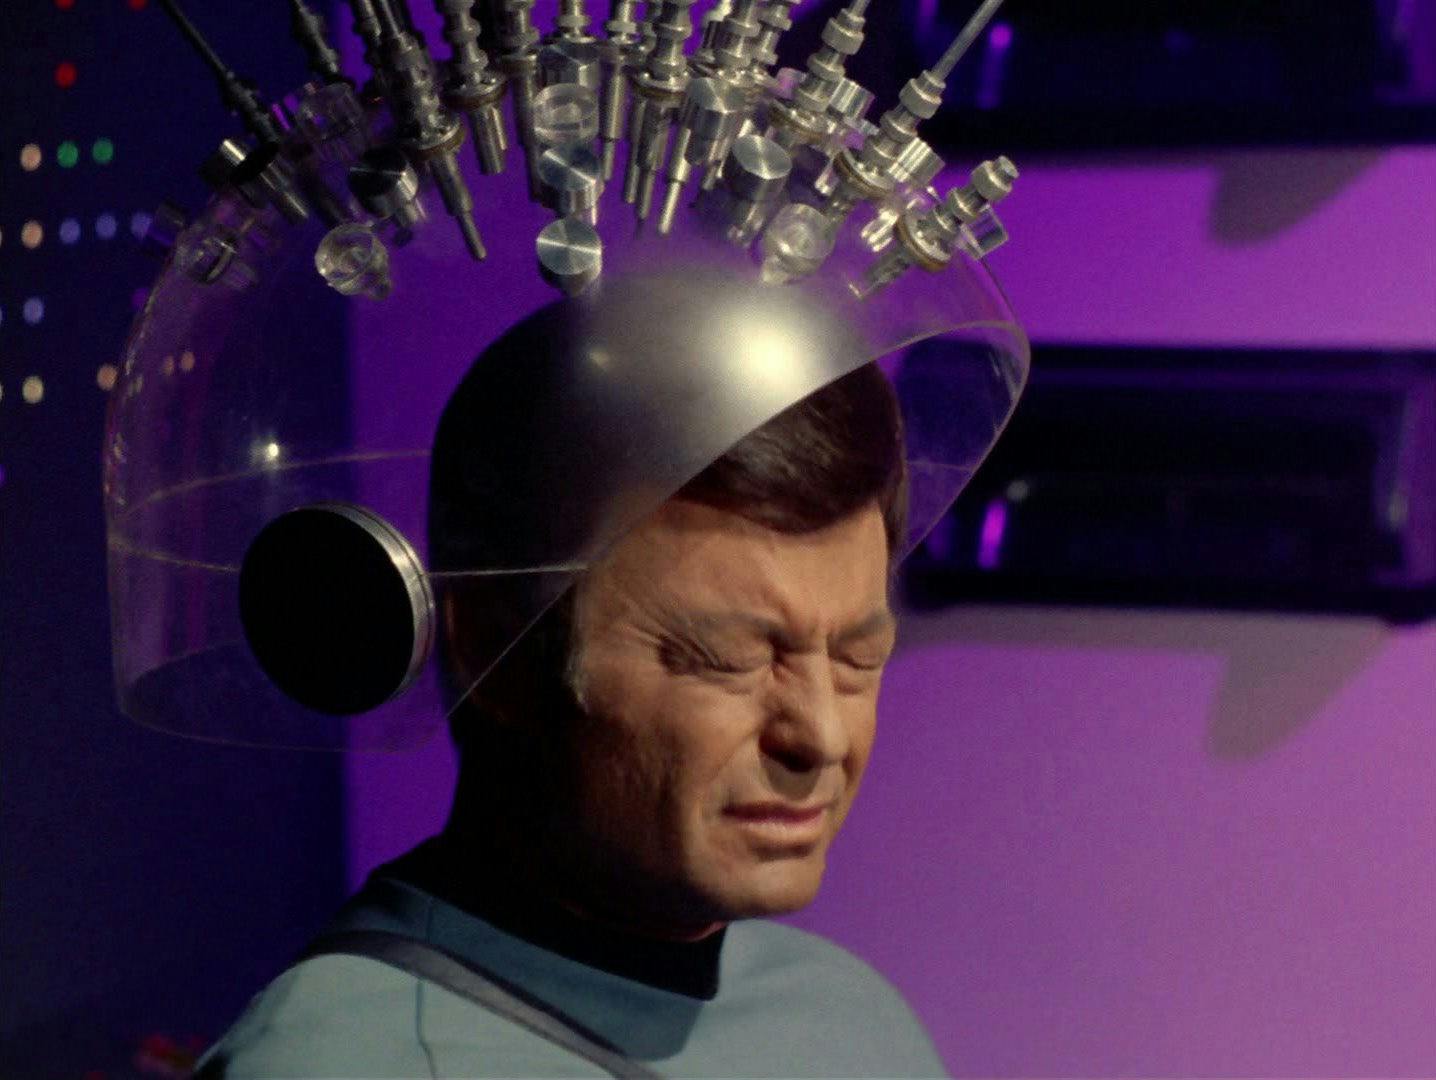 With a helmet contraption on his head, McCoy painfully grimaces in 'Spock's Brain'